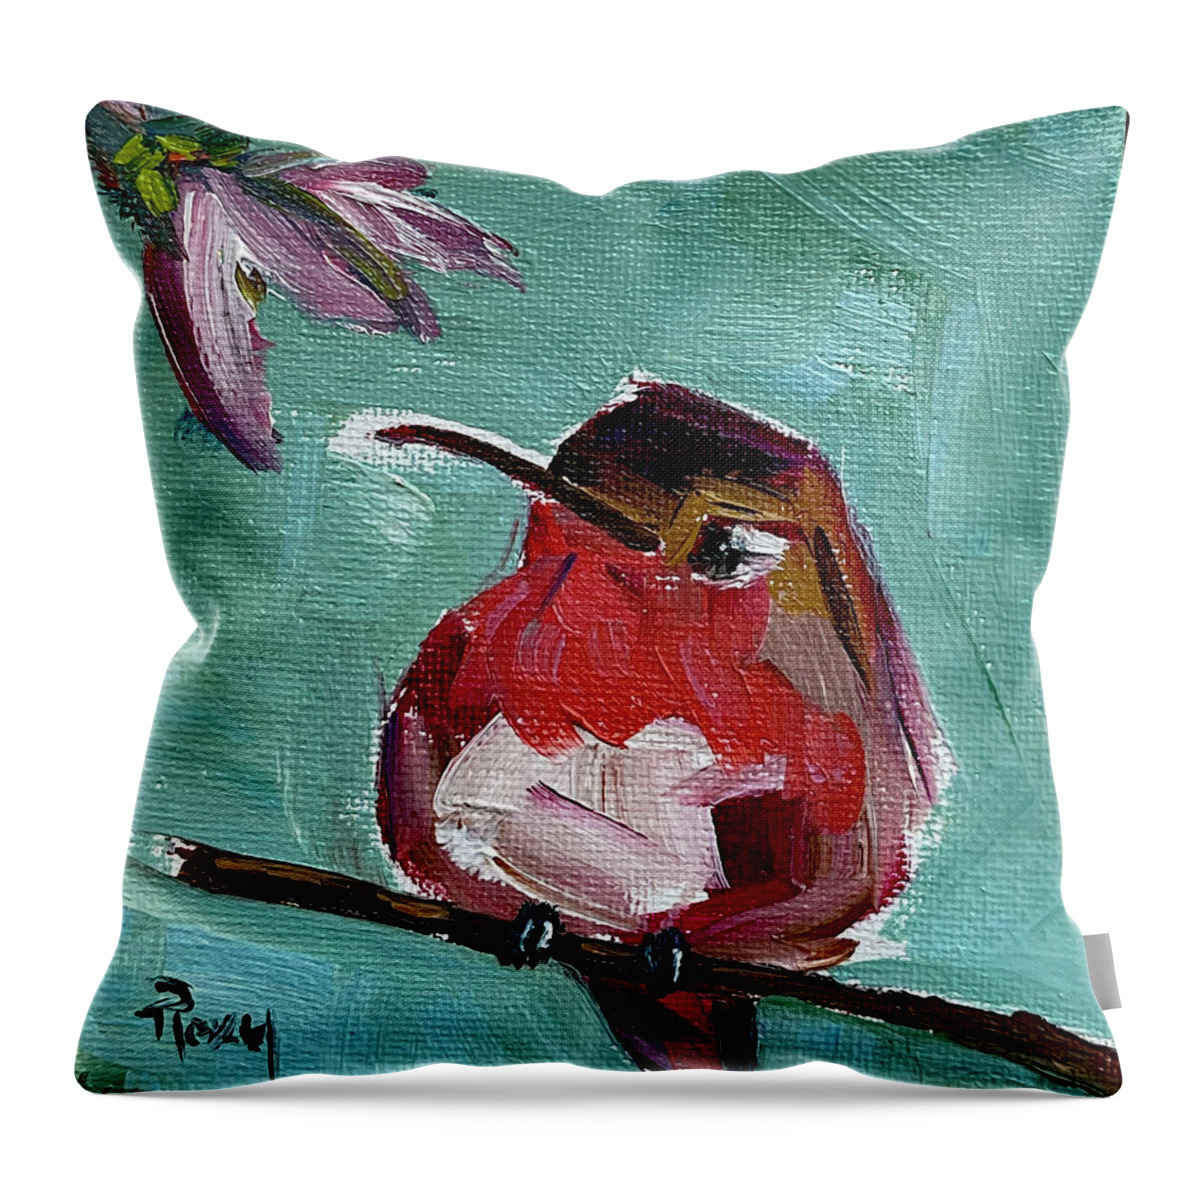 Hummingbird Throw Pillow featuring the painting Pink Throat Hummingbird by Roxy Rich